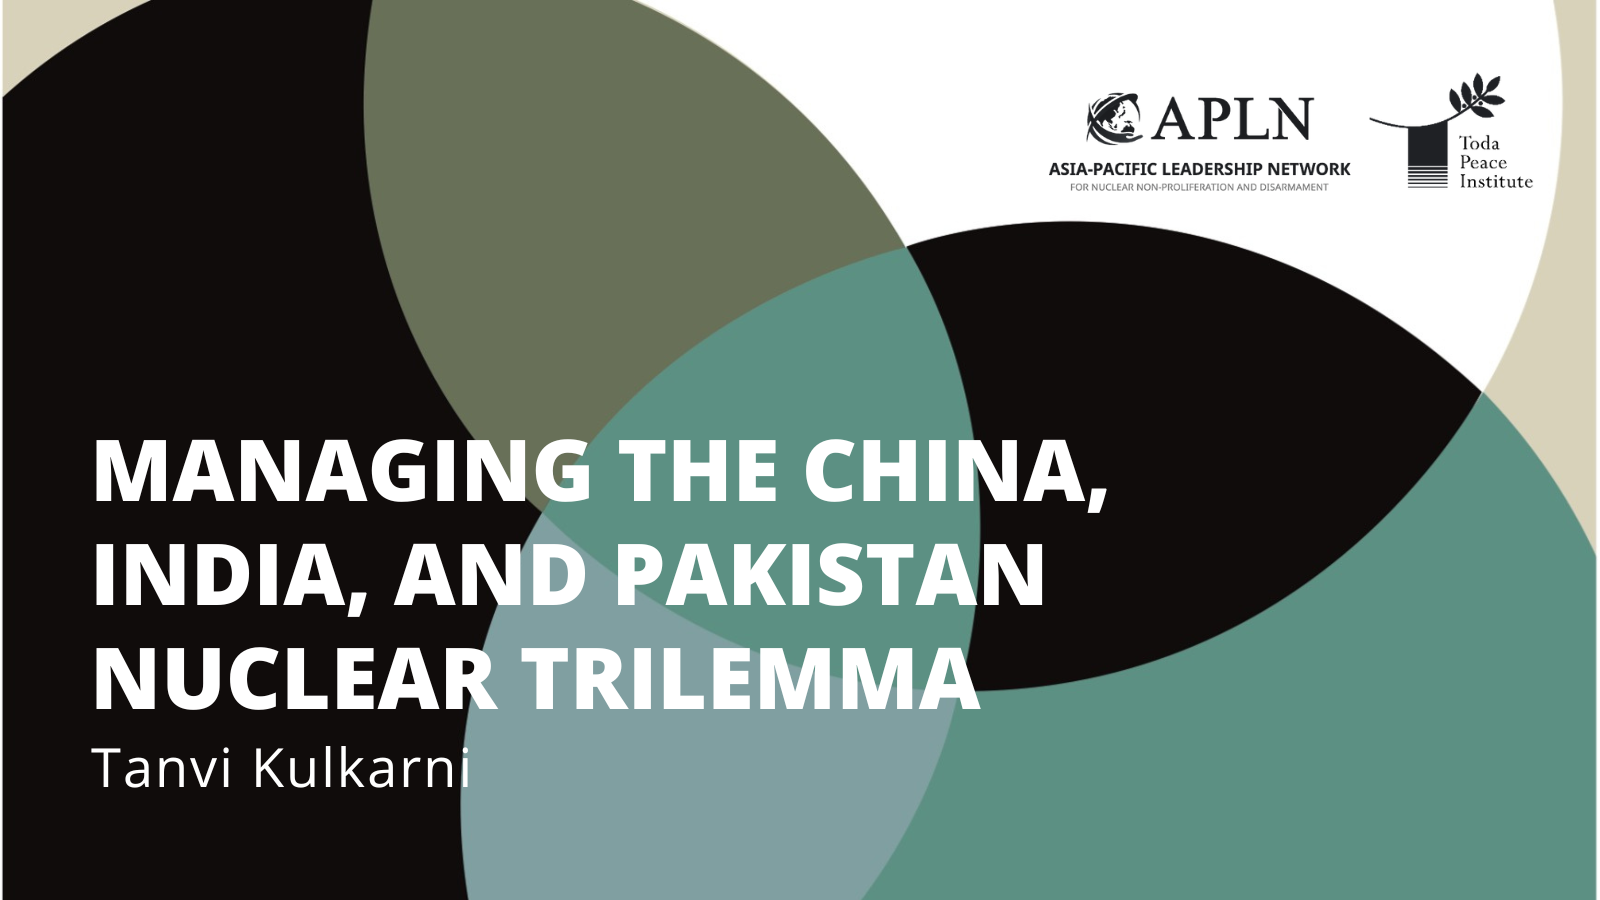 [Special Report] Managing the China, India, and Pakistan Nuclear Trilemma